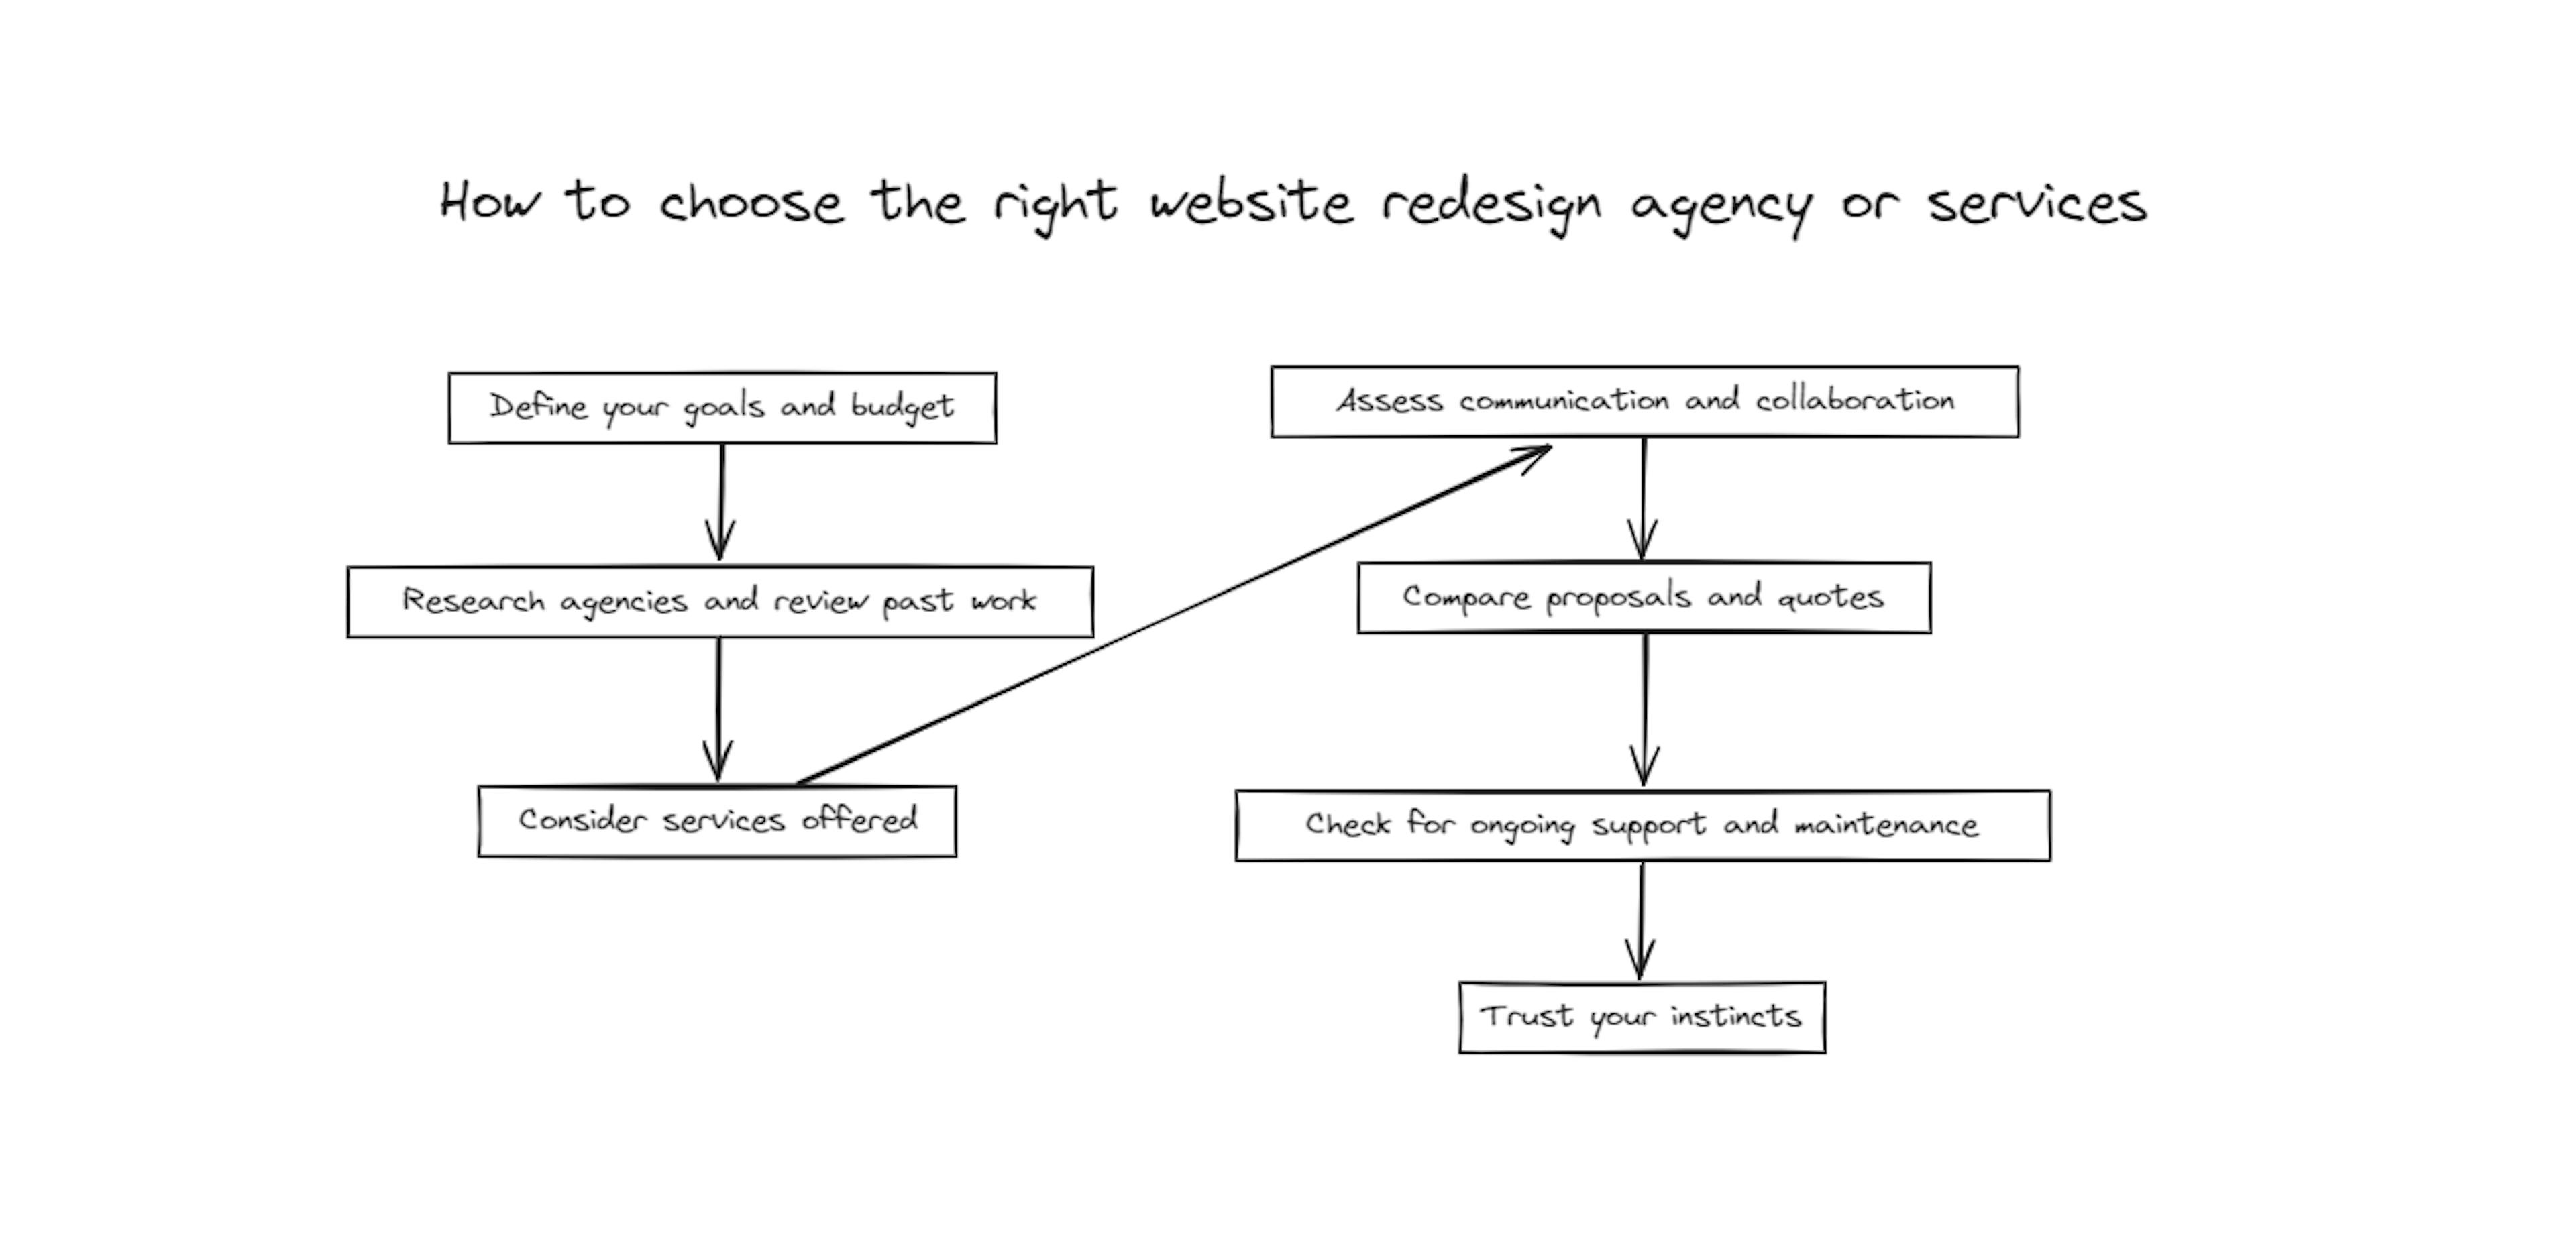 Steps for how to choose the right website redesign agency.